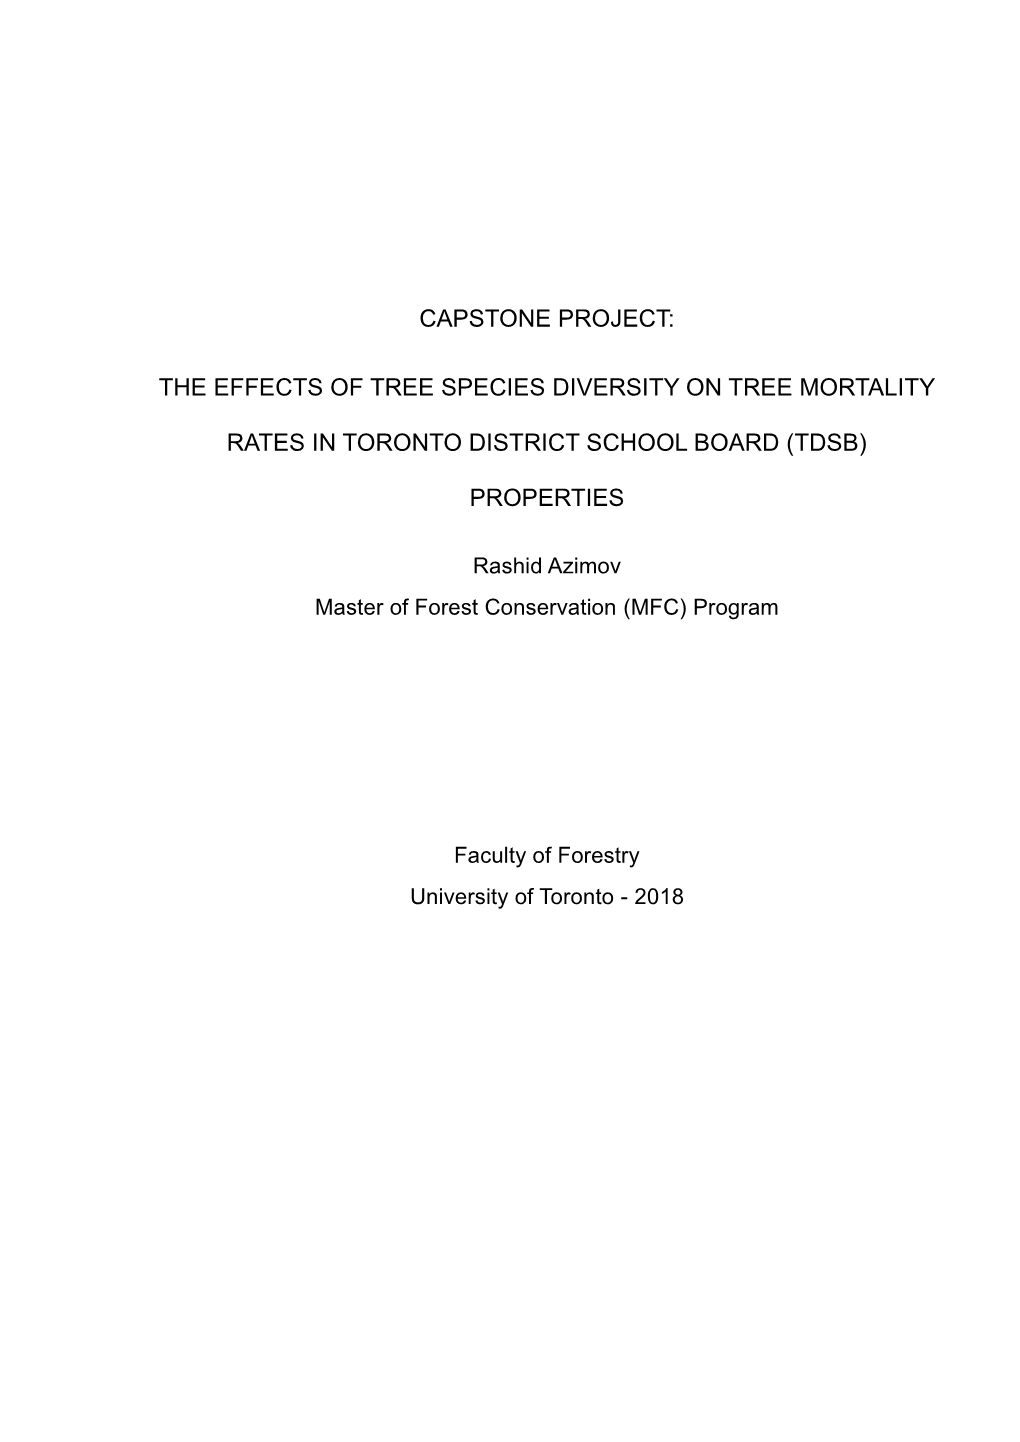 Capstone Project: the Effects of Tree Species Diversity on Tree Mortality Rates in Toronto District School Board (Tdsb) Properti